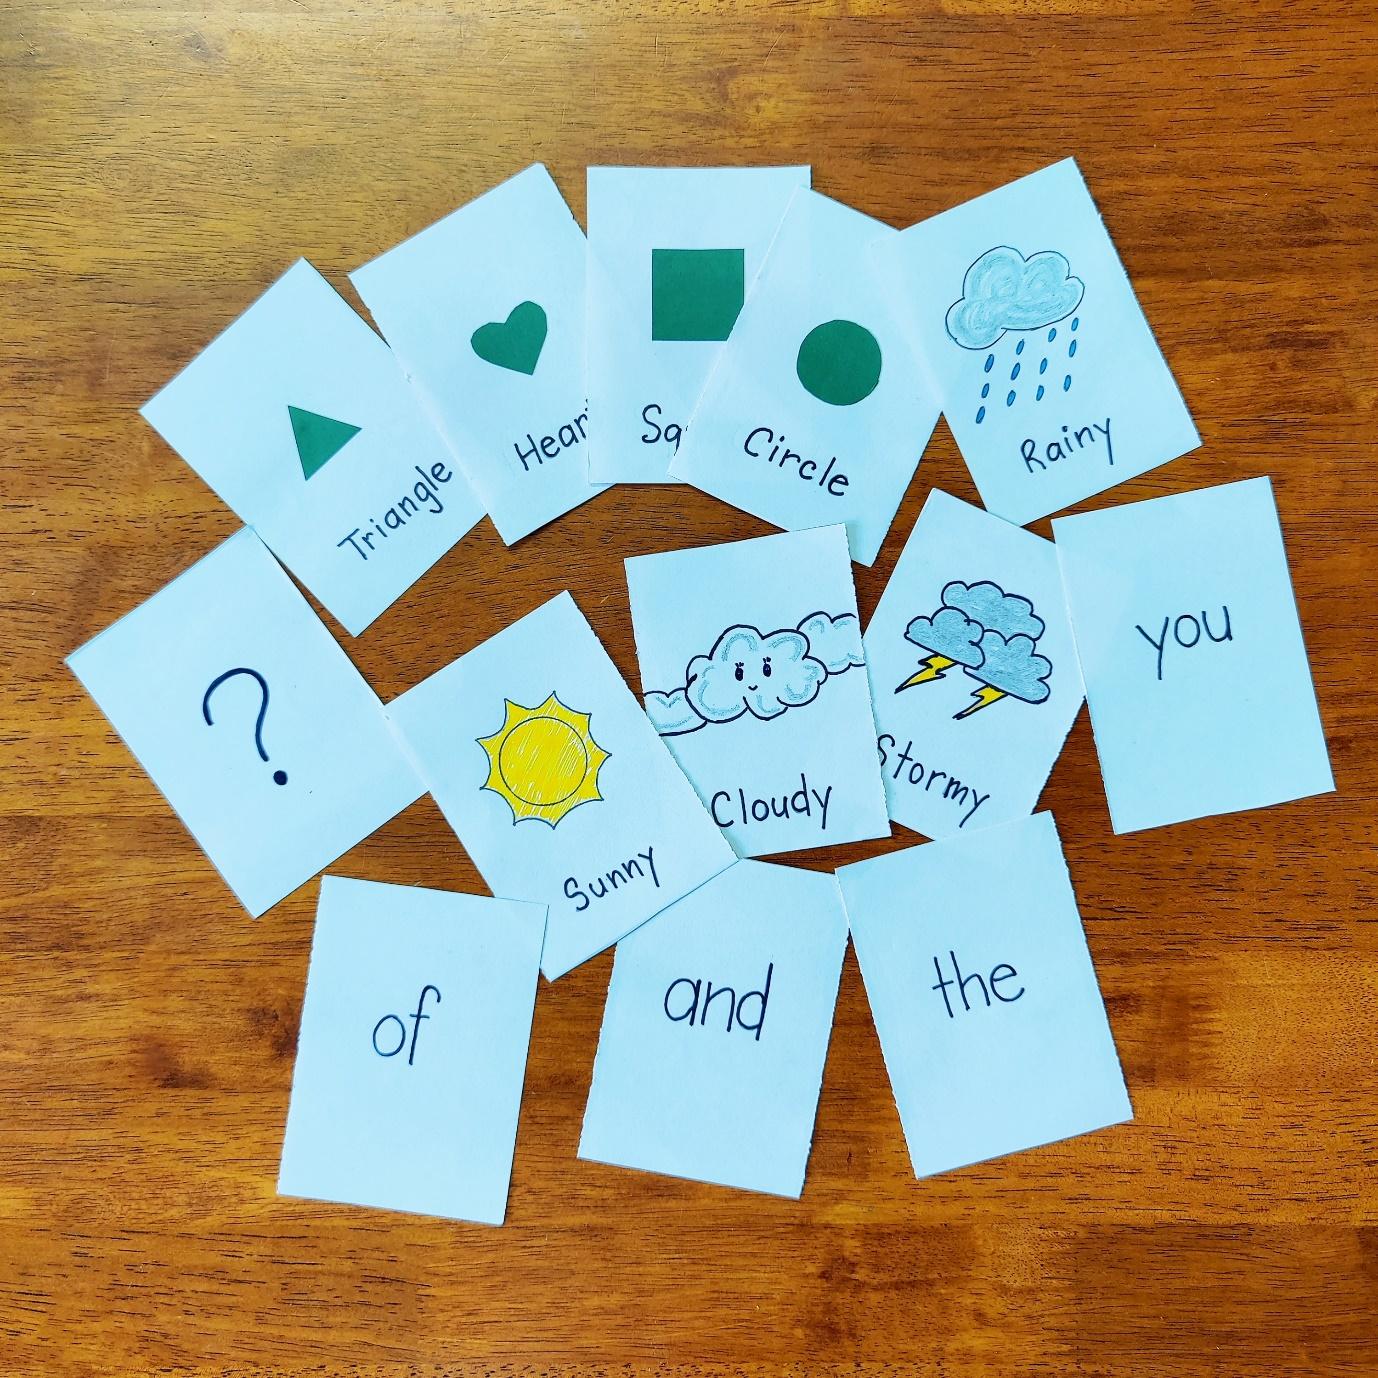 How to make flashcards at home; DIY flashcards